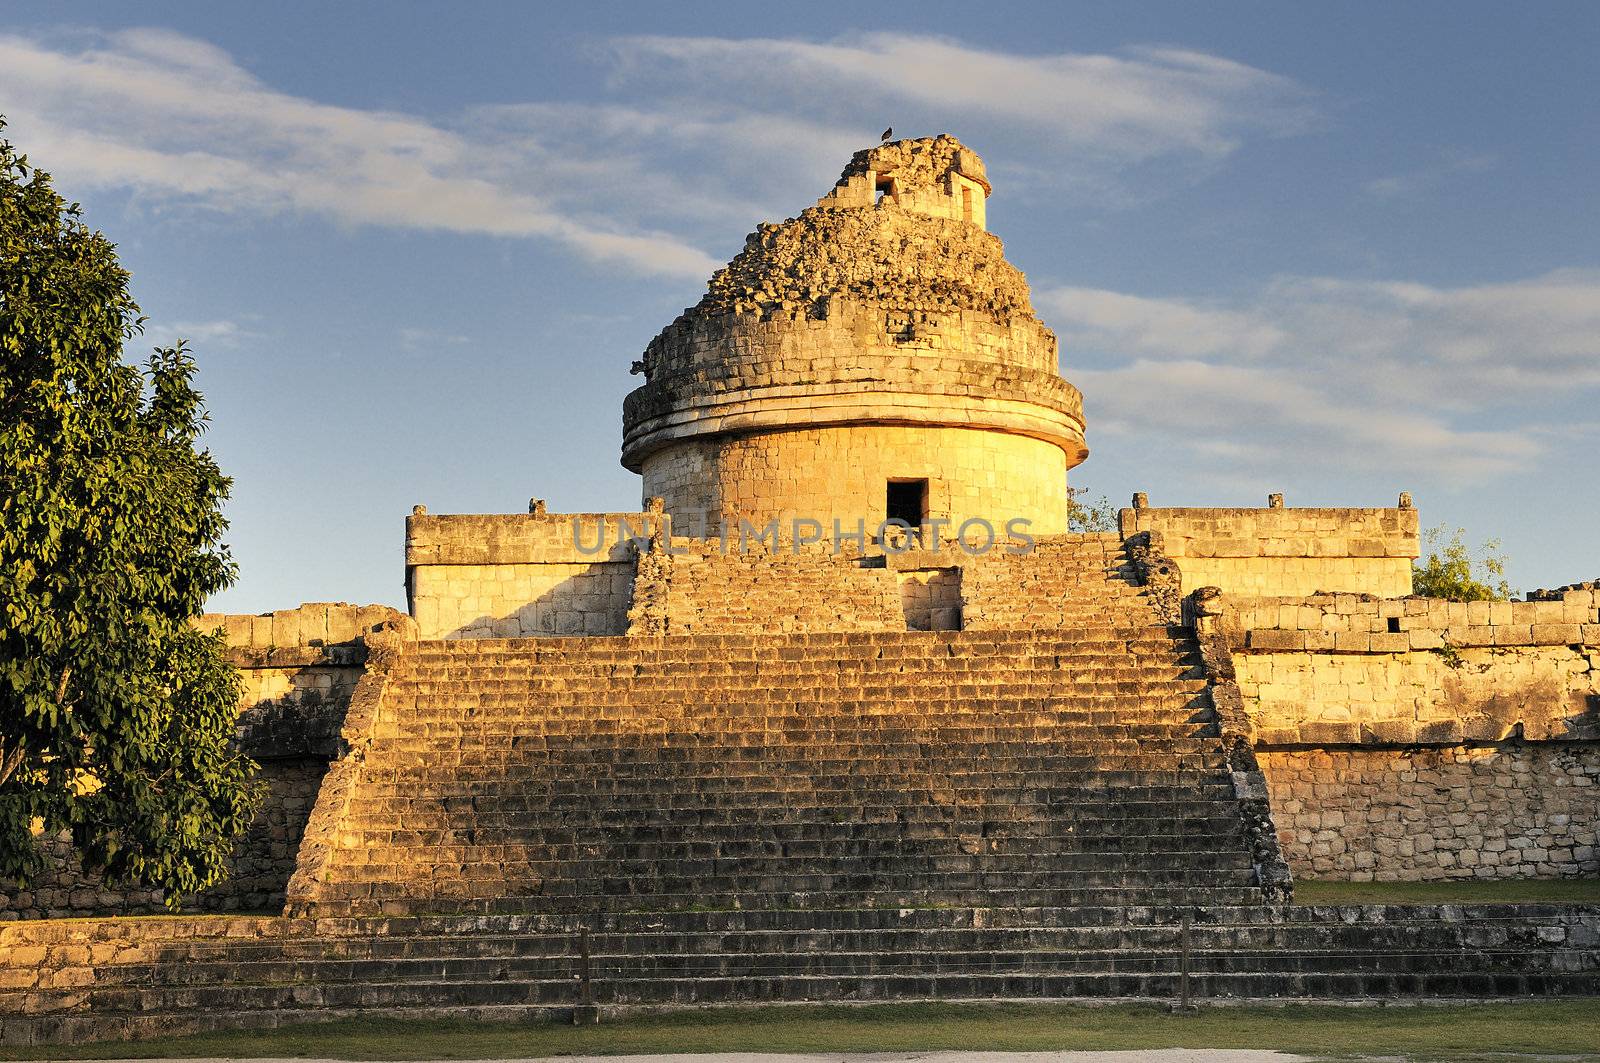 The observatory at Chichen Itza, by ventdusud